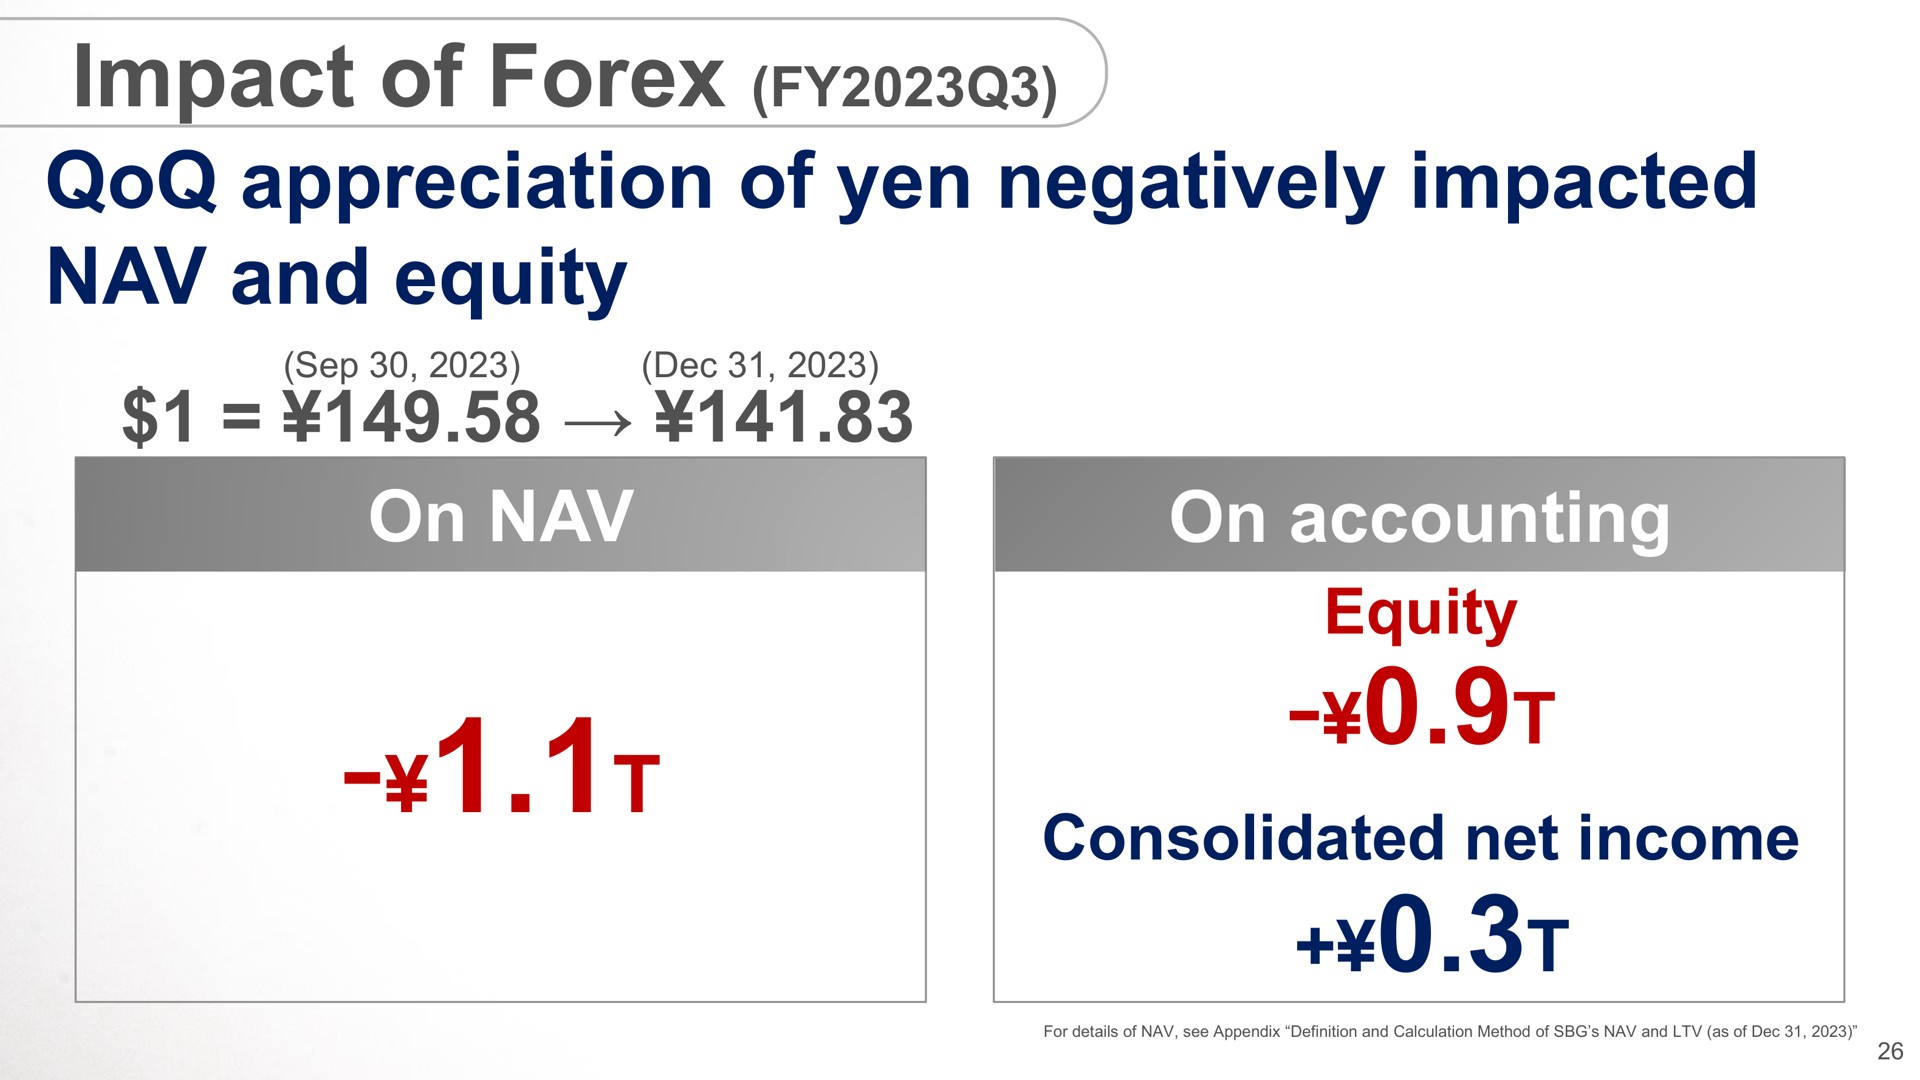 impact of appreciation of yen negatively impacted and equity on on accounting equity consolidated net income a | SoftBank